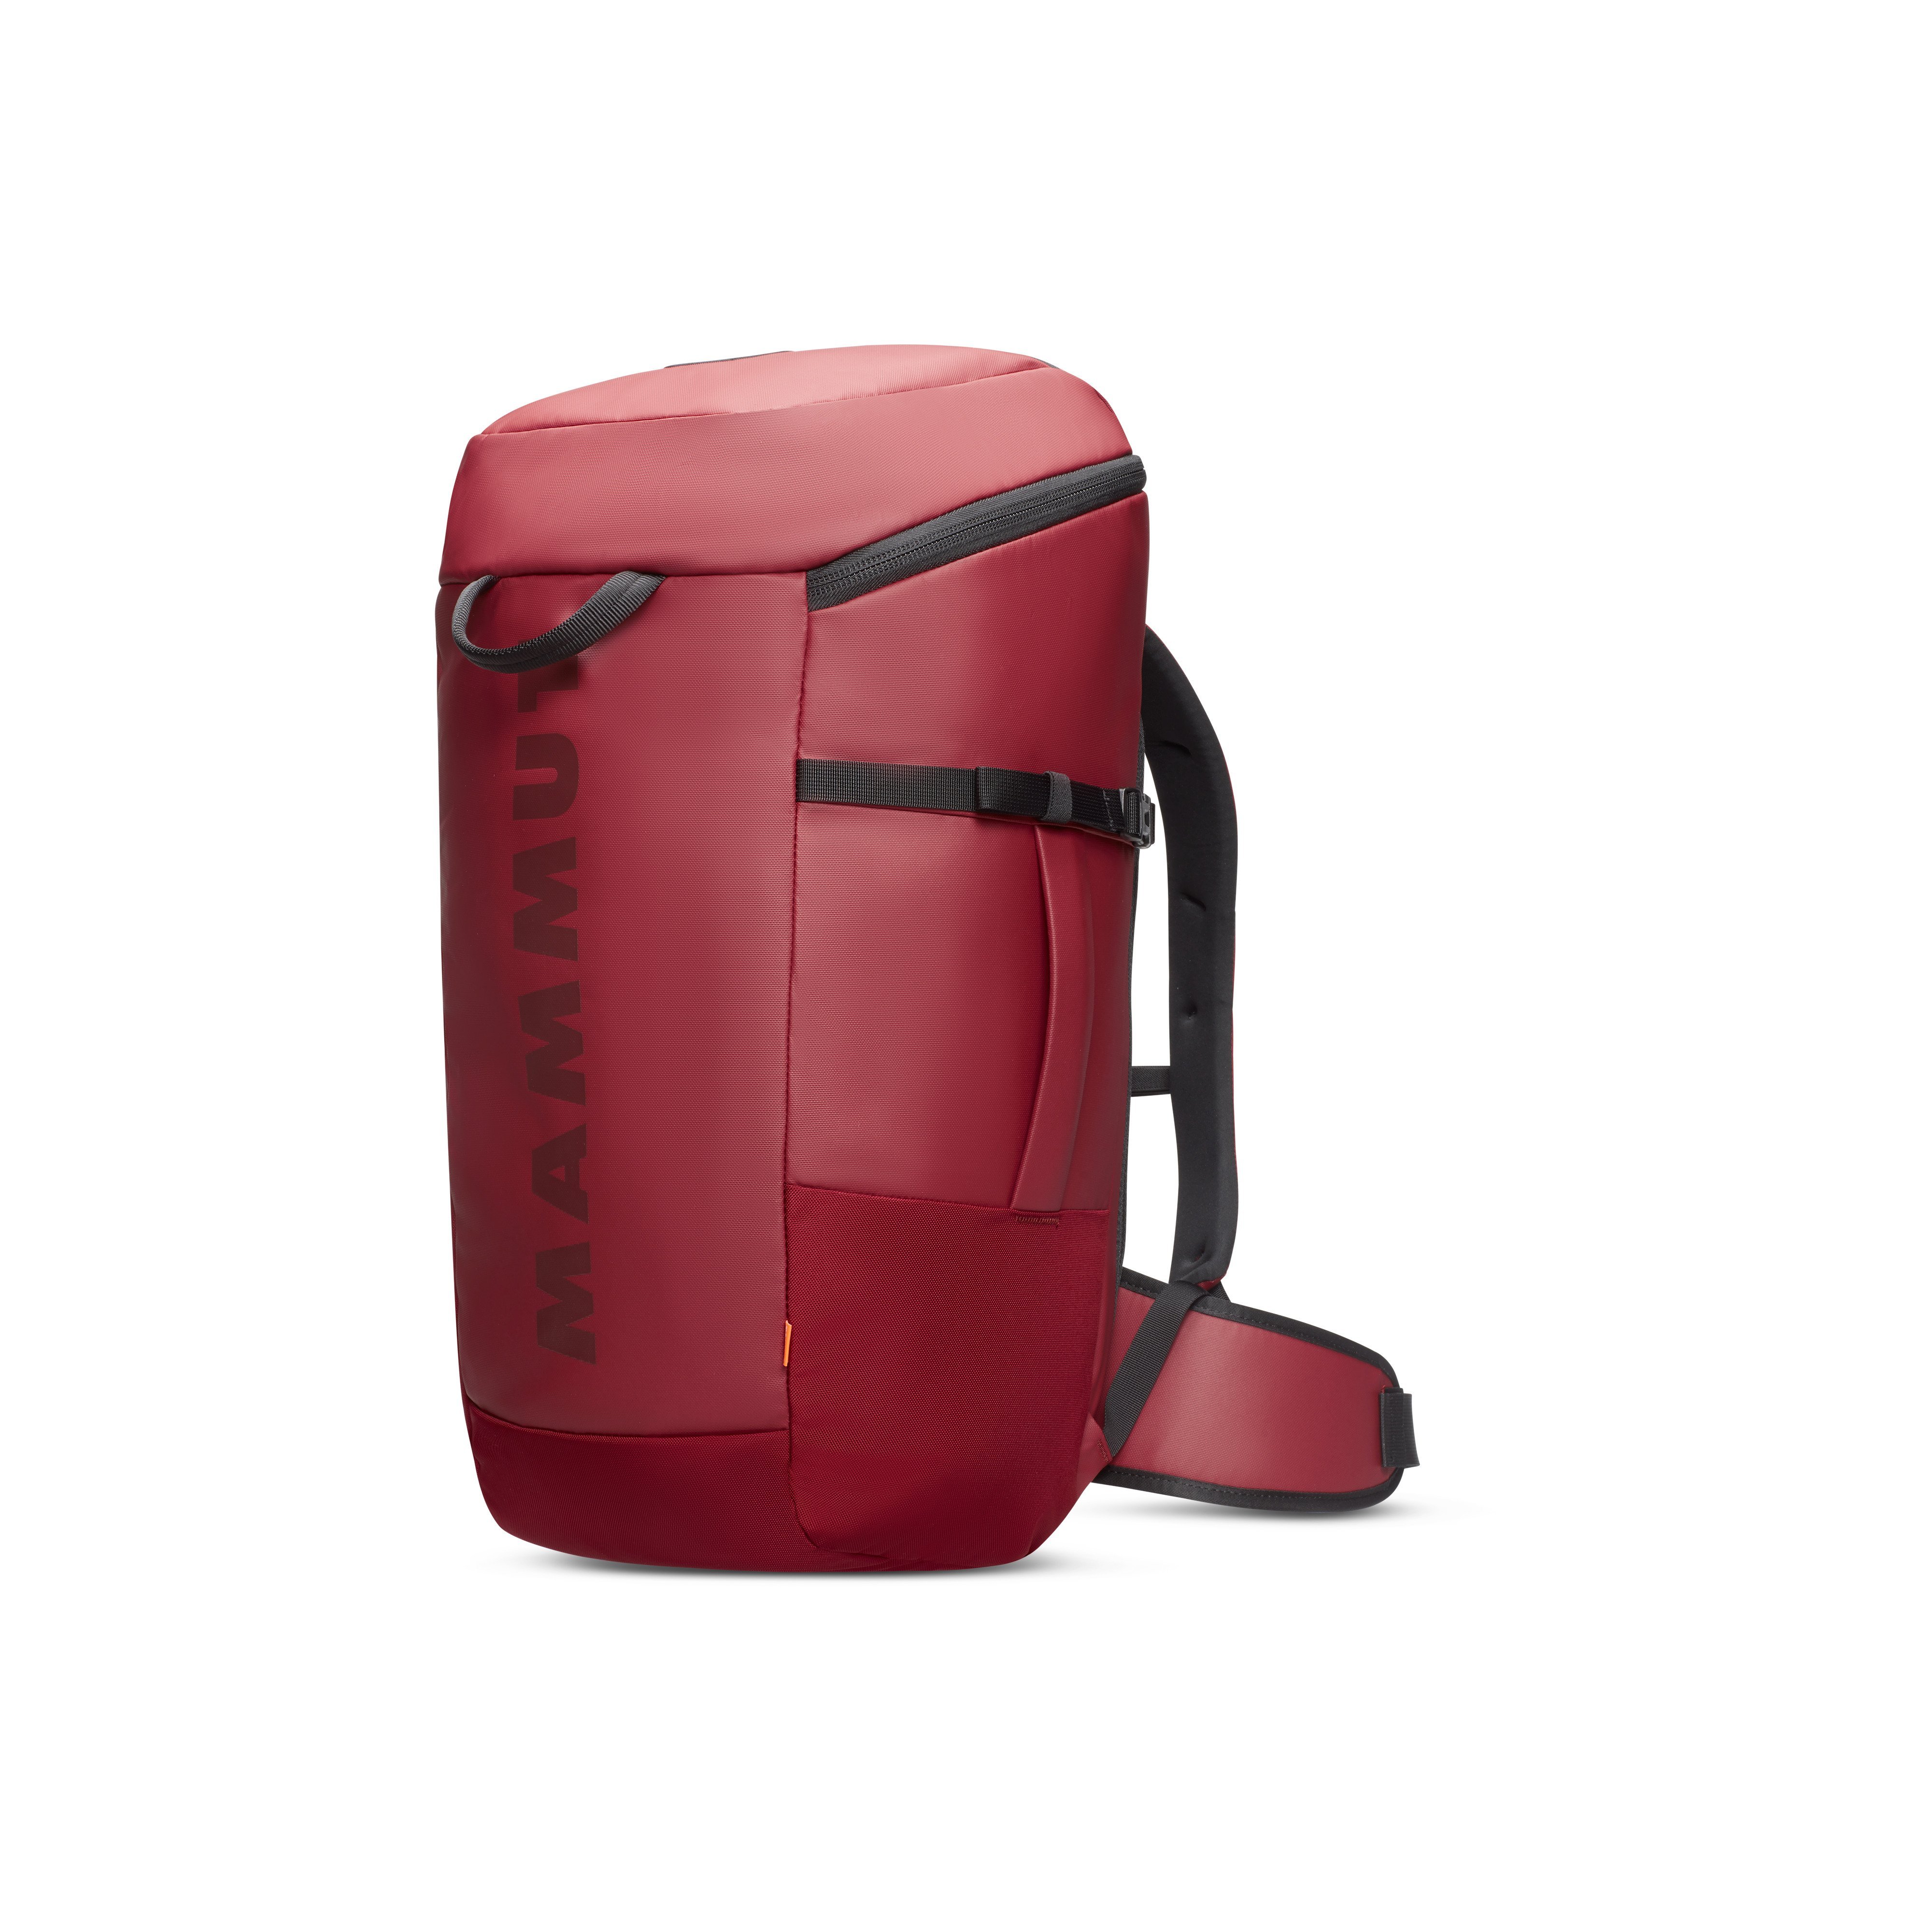 Neon 45 Women - blood red, 45 L product image